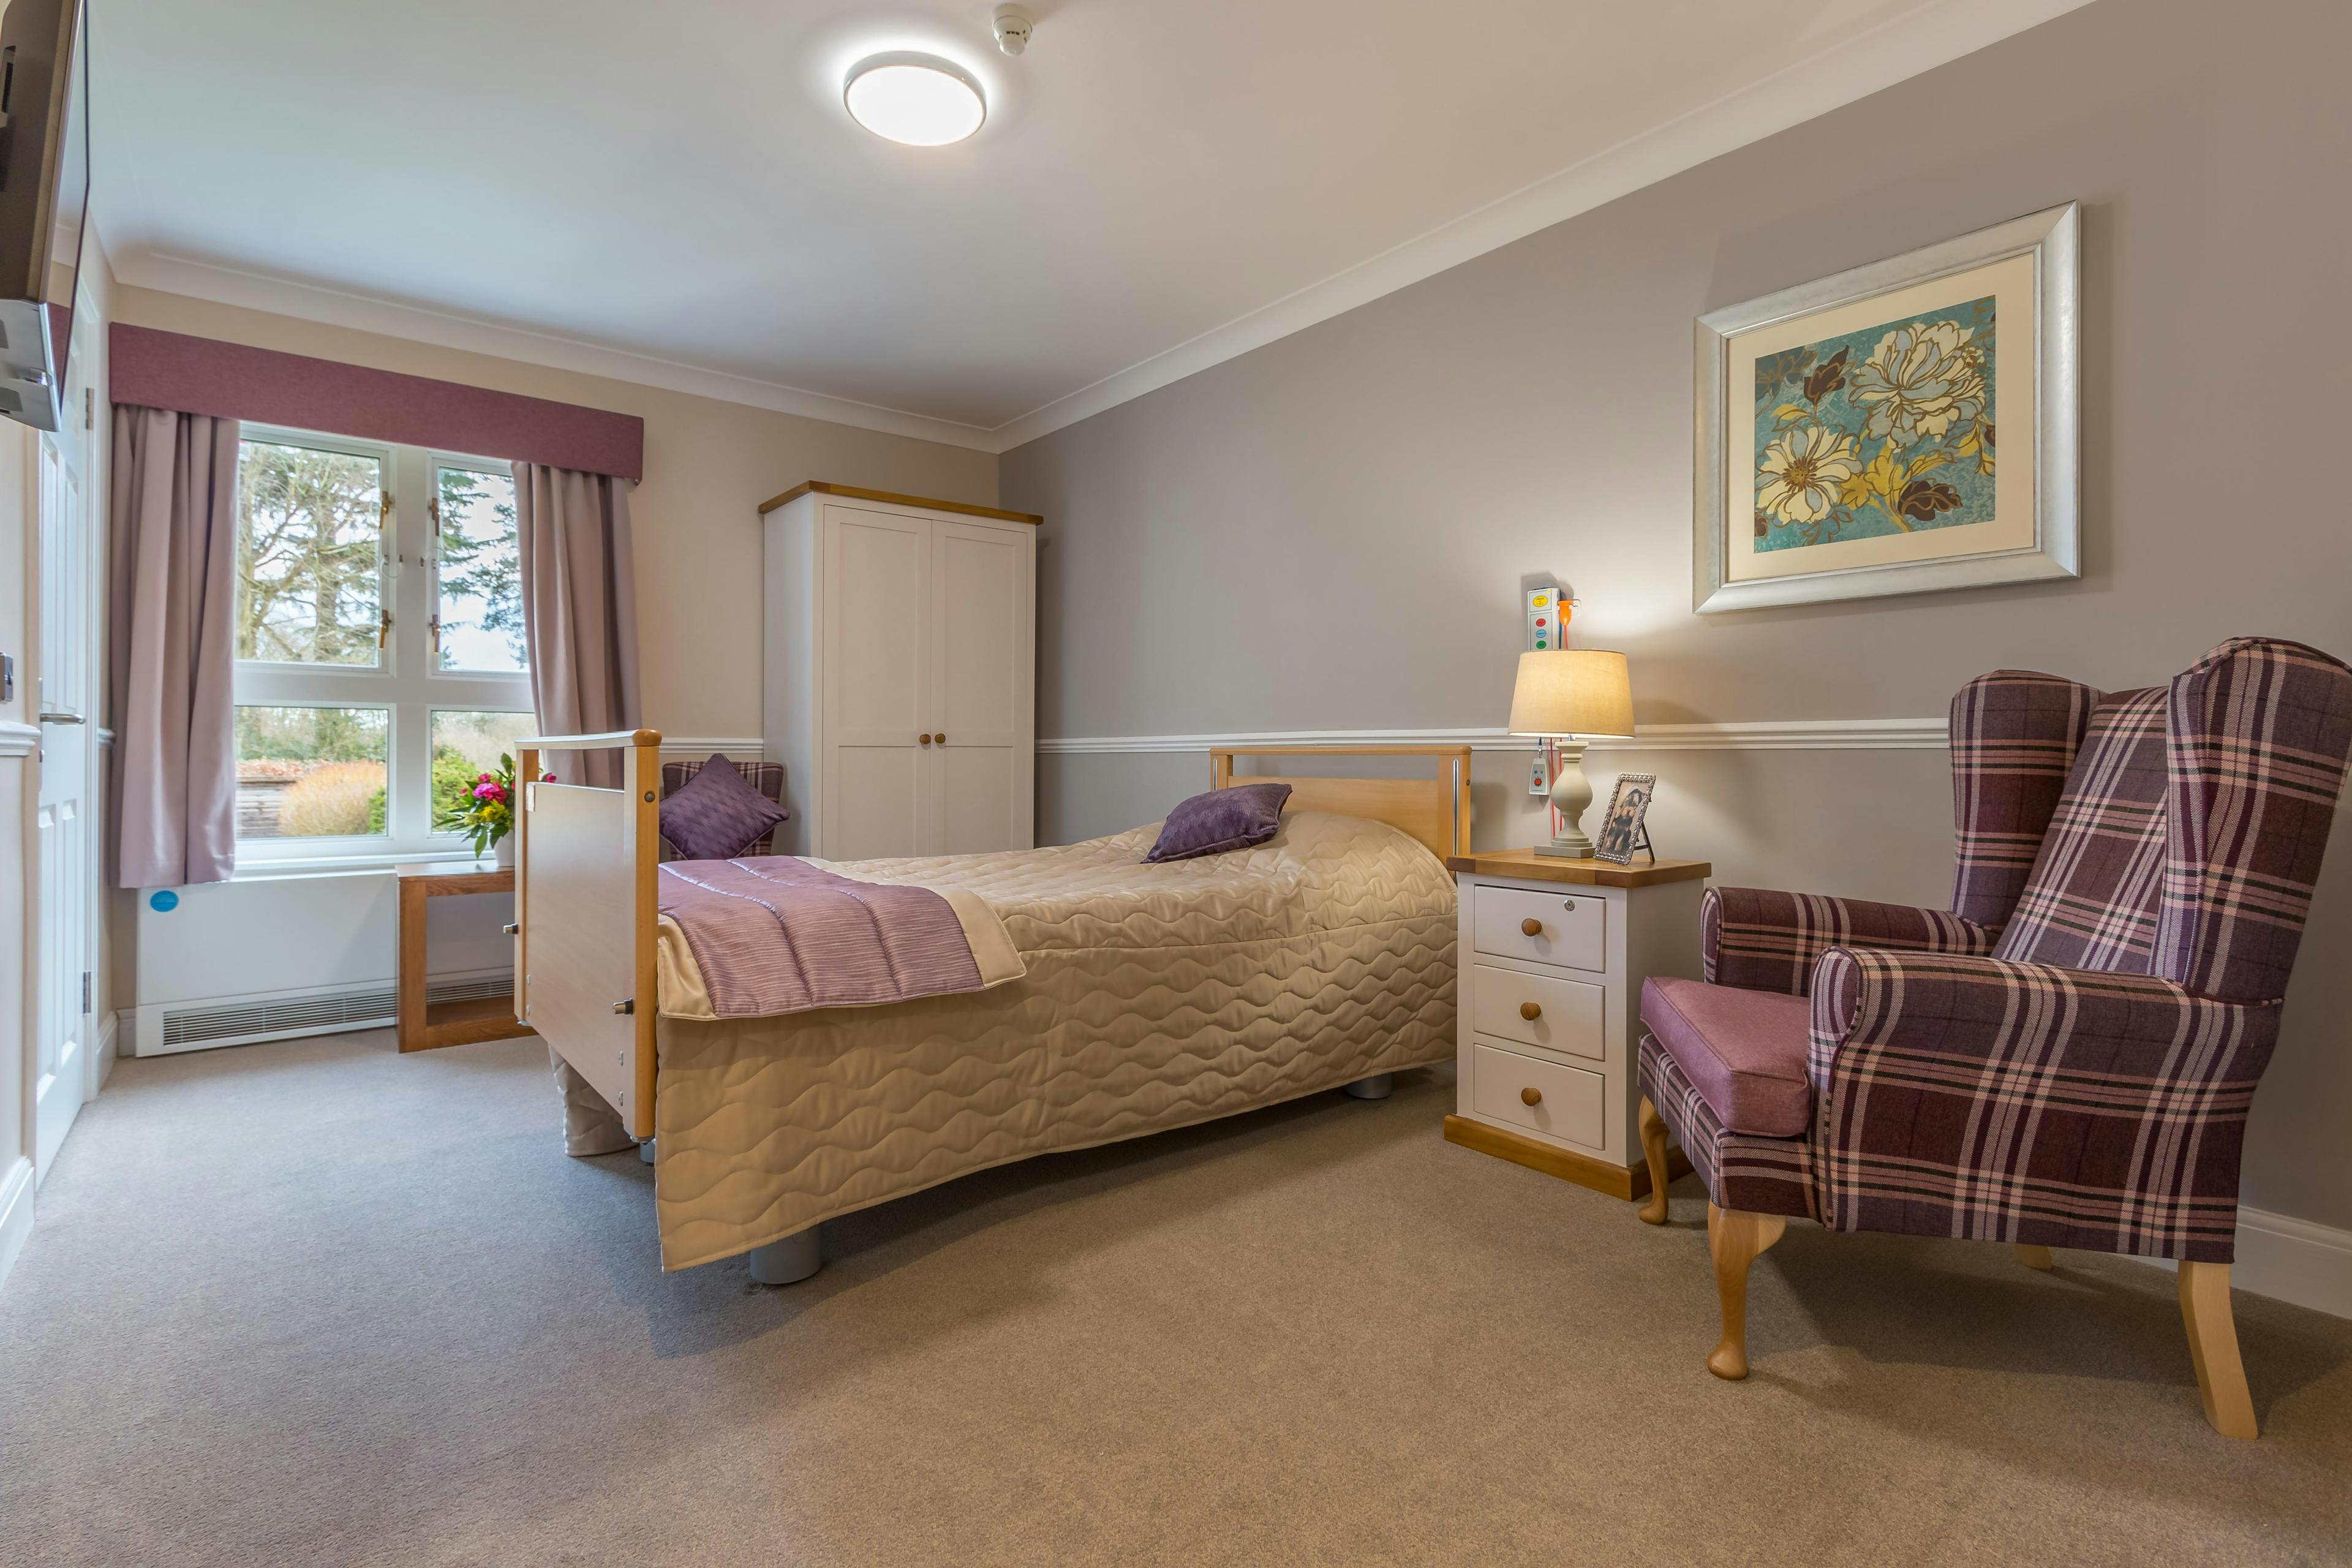 Bedroom at Oxford Beaumont Care Home in Oxford, Oxfordshire